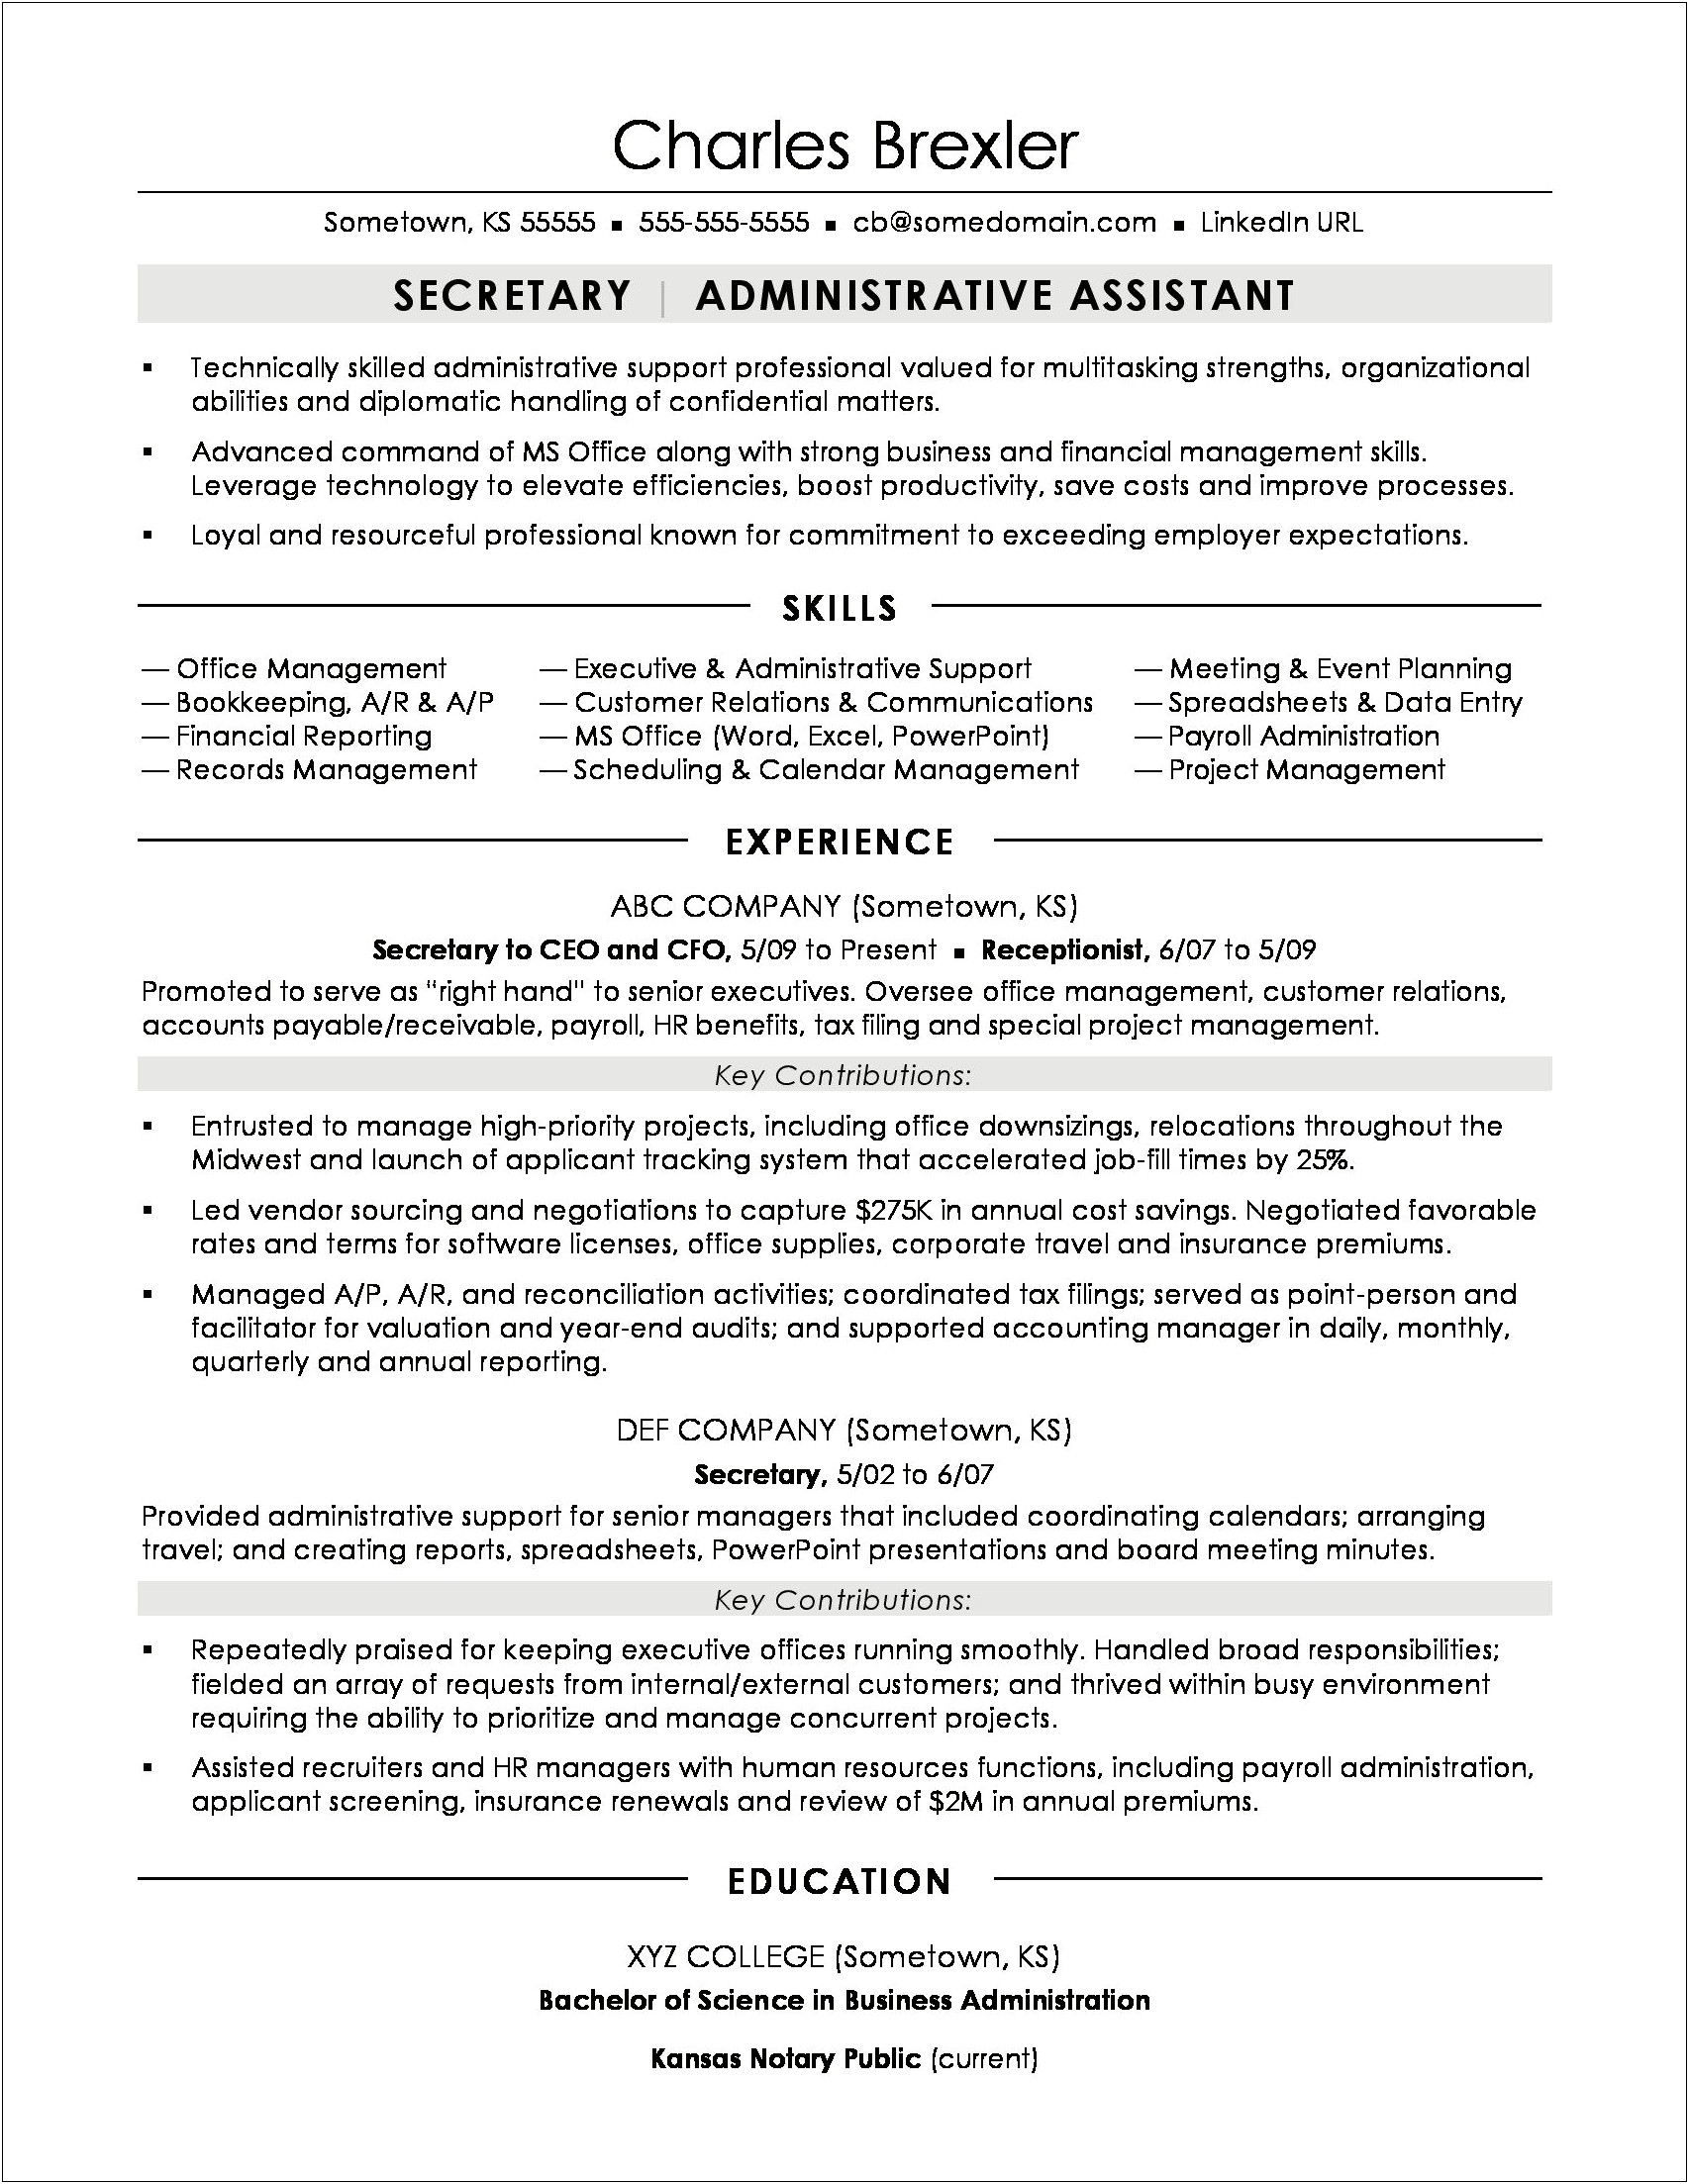 Administrative Assistant With No Experience Resume